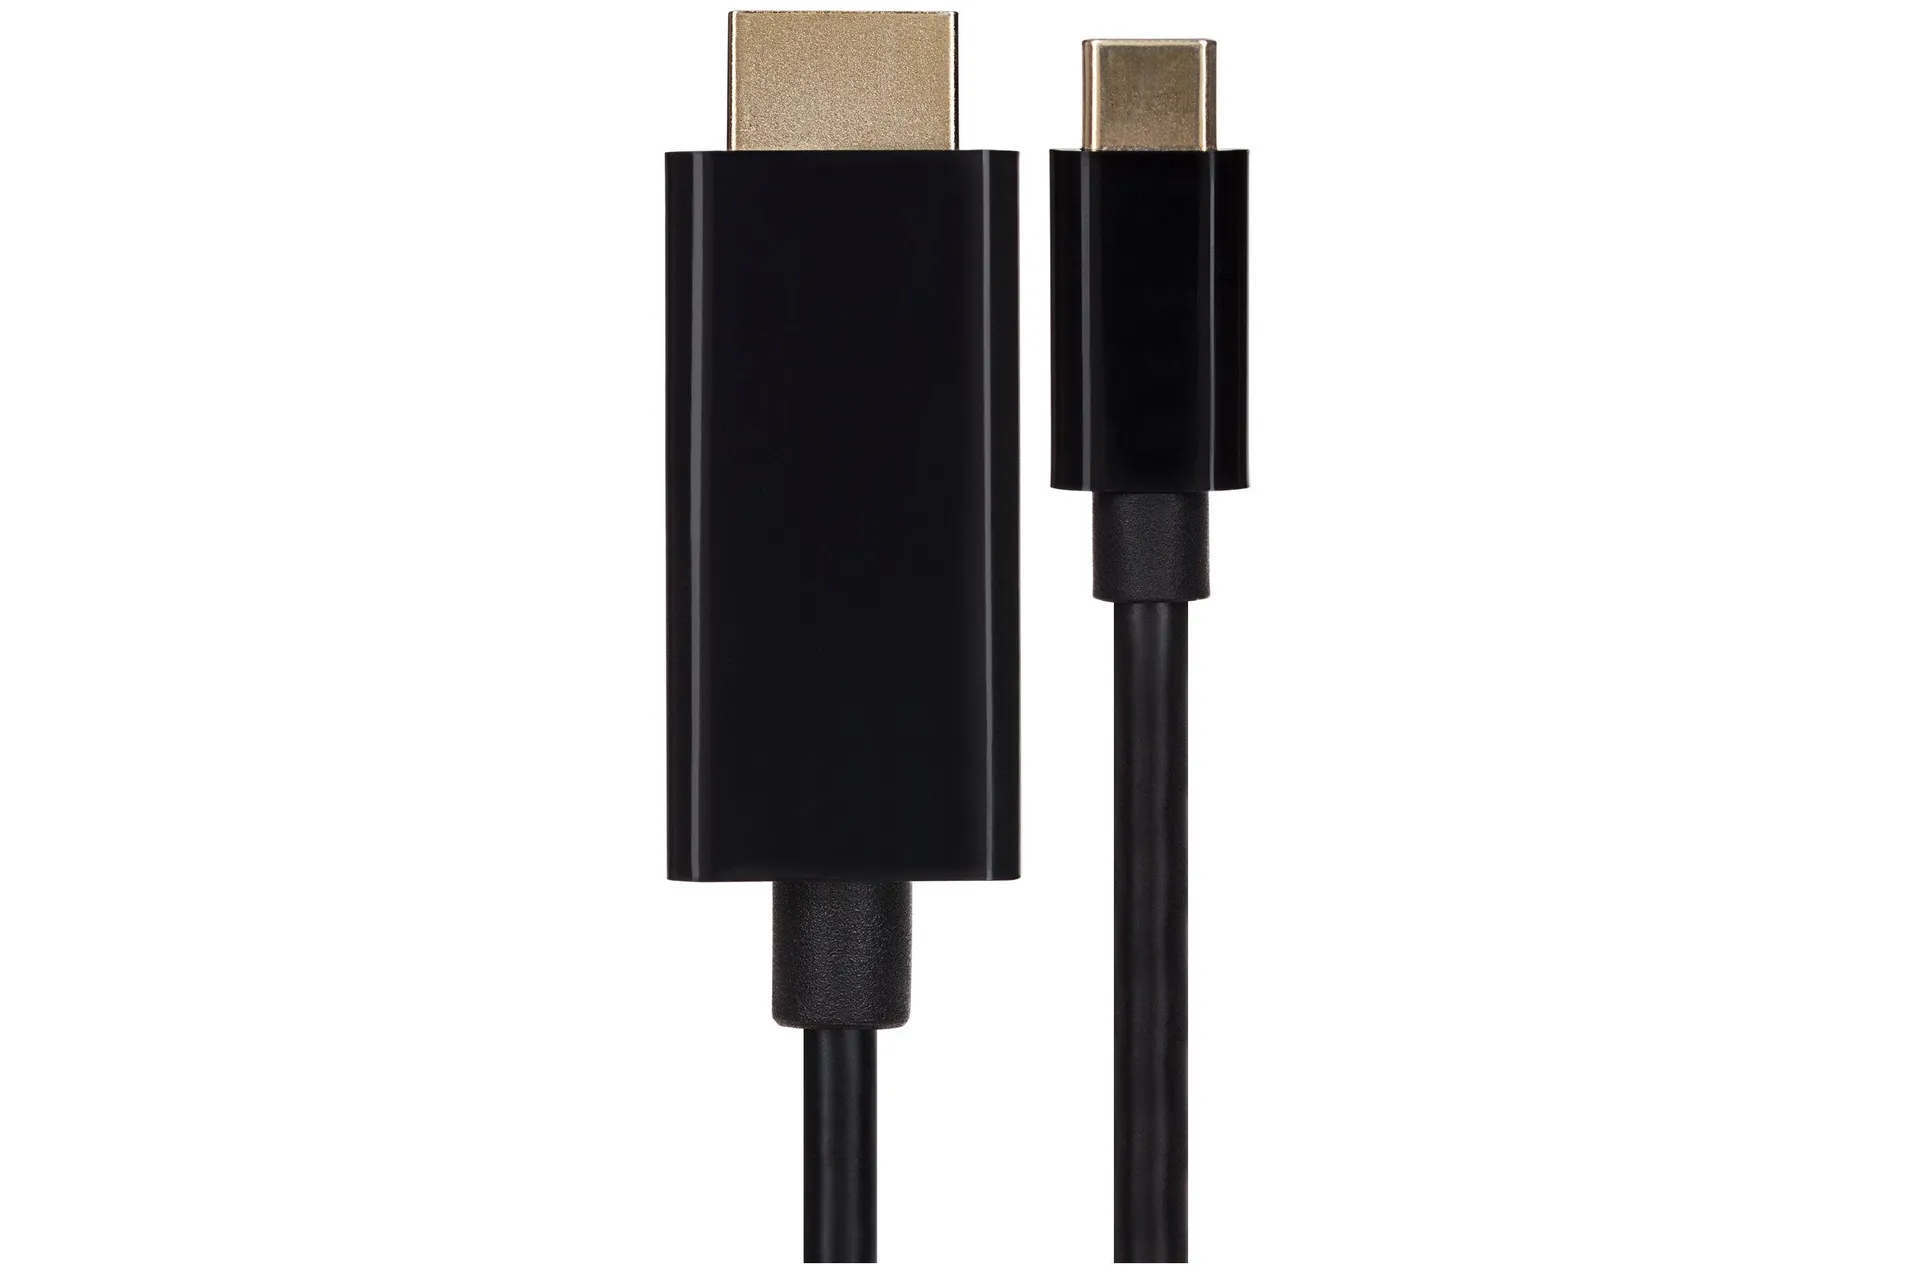 Maplin USB-C to HDMI Cable Adapter (Supports 4K Ultra HD @ 60Hz) - Black